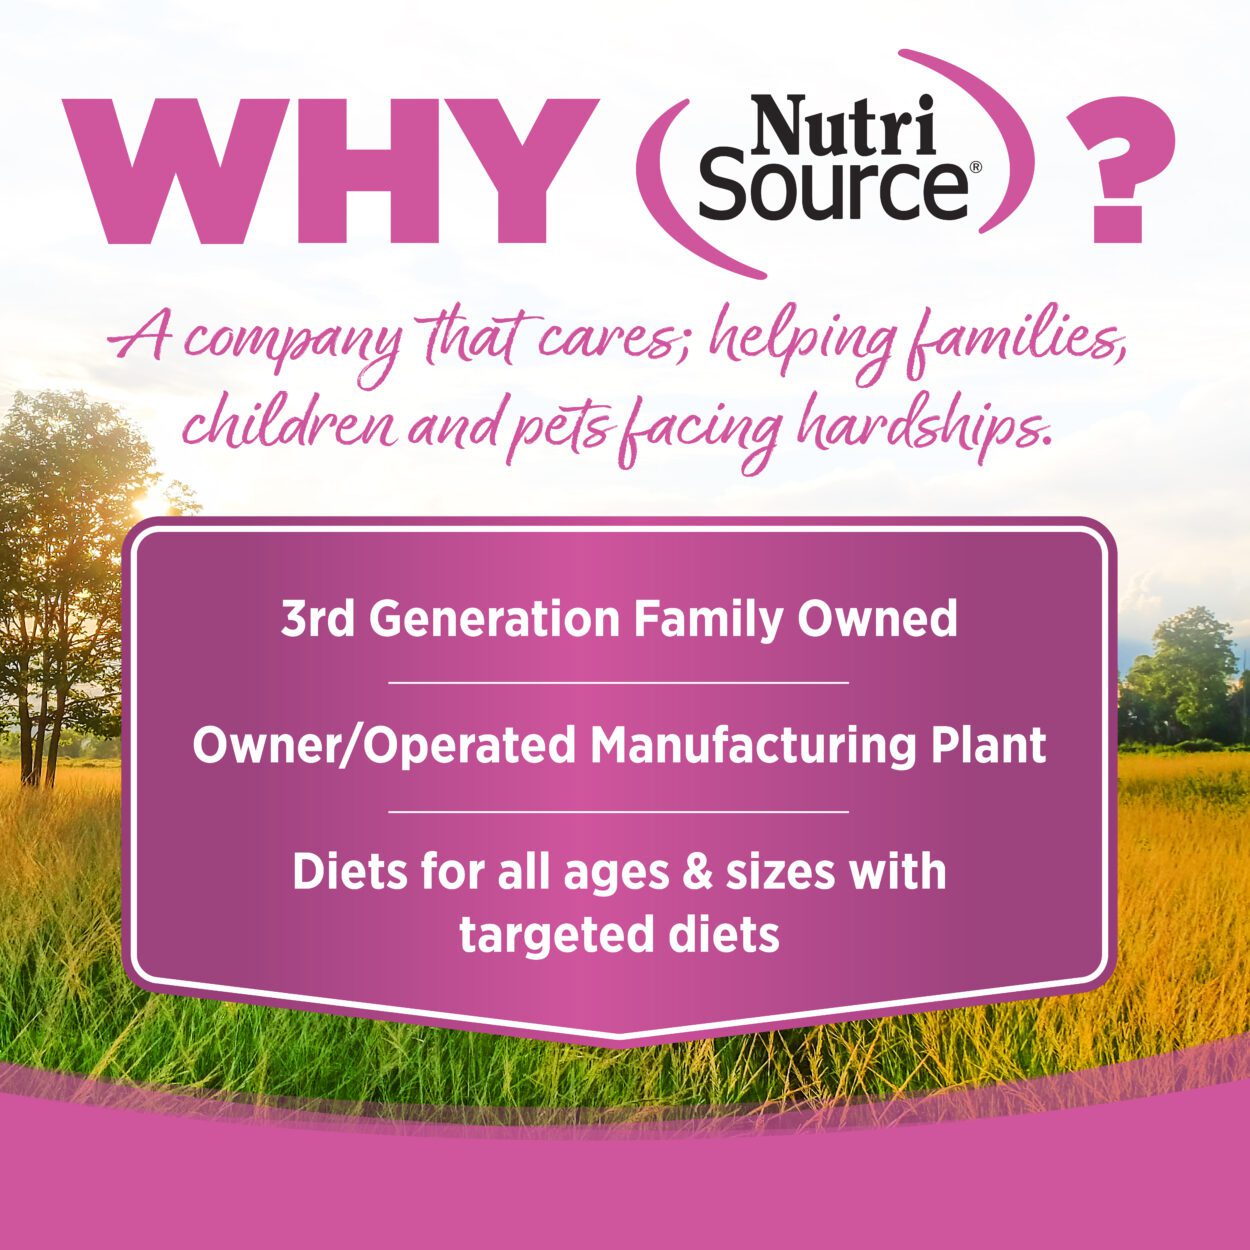 WHY NutriSource?